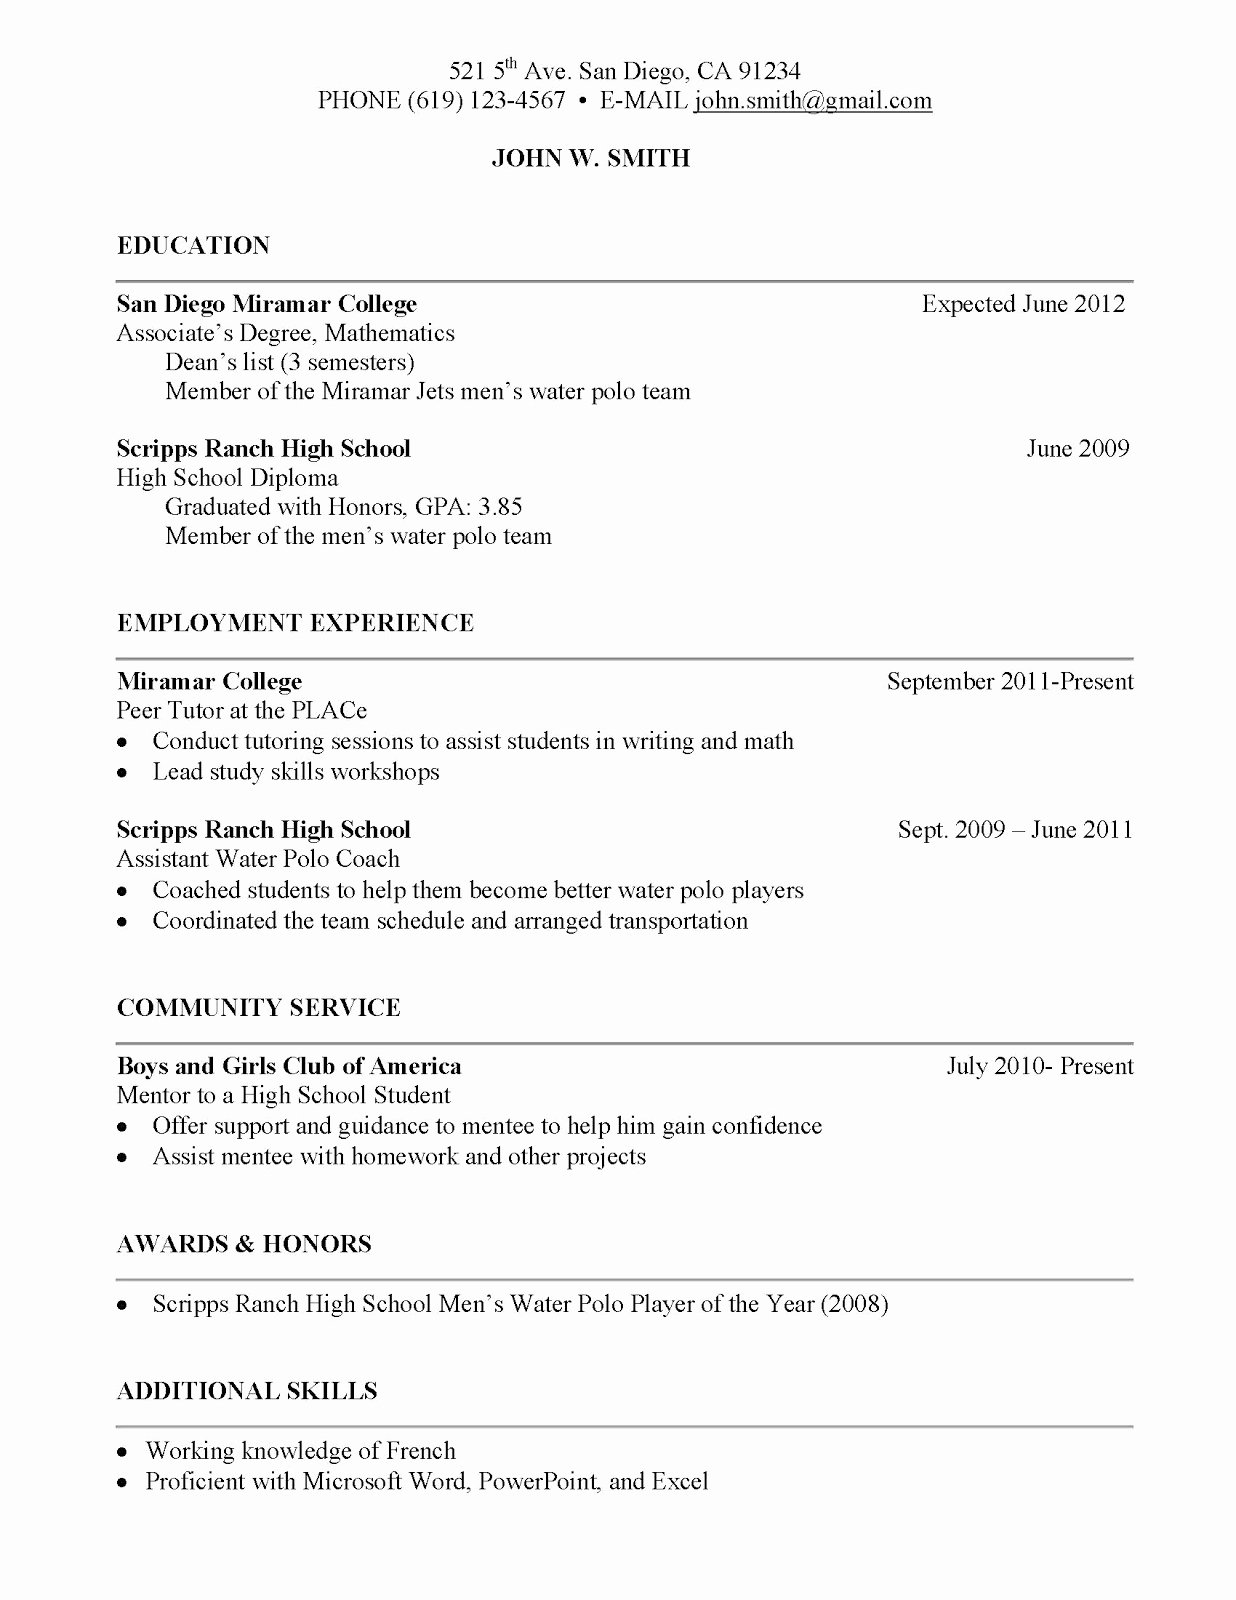 Build and Release Resume format thesis Web Fc2